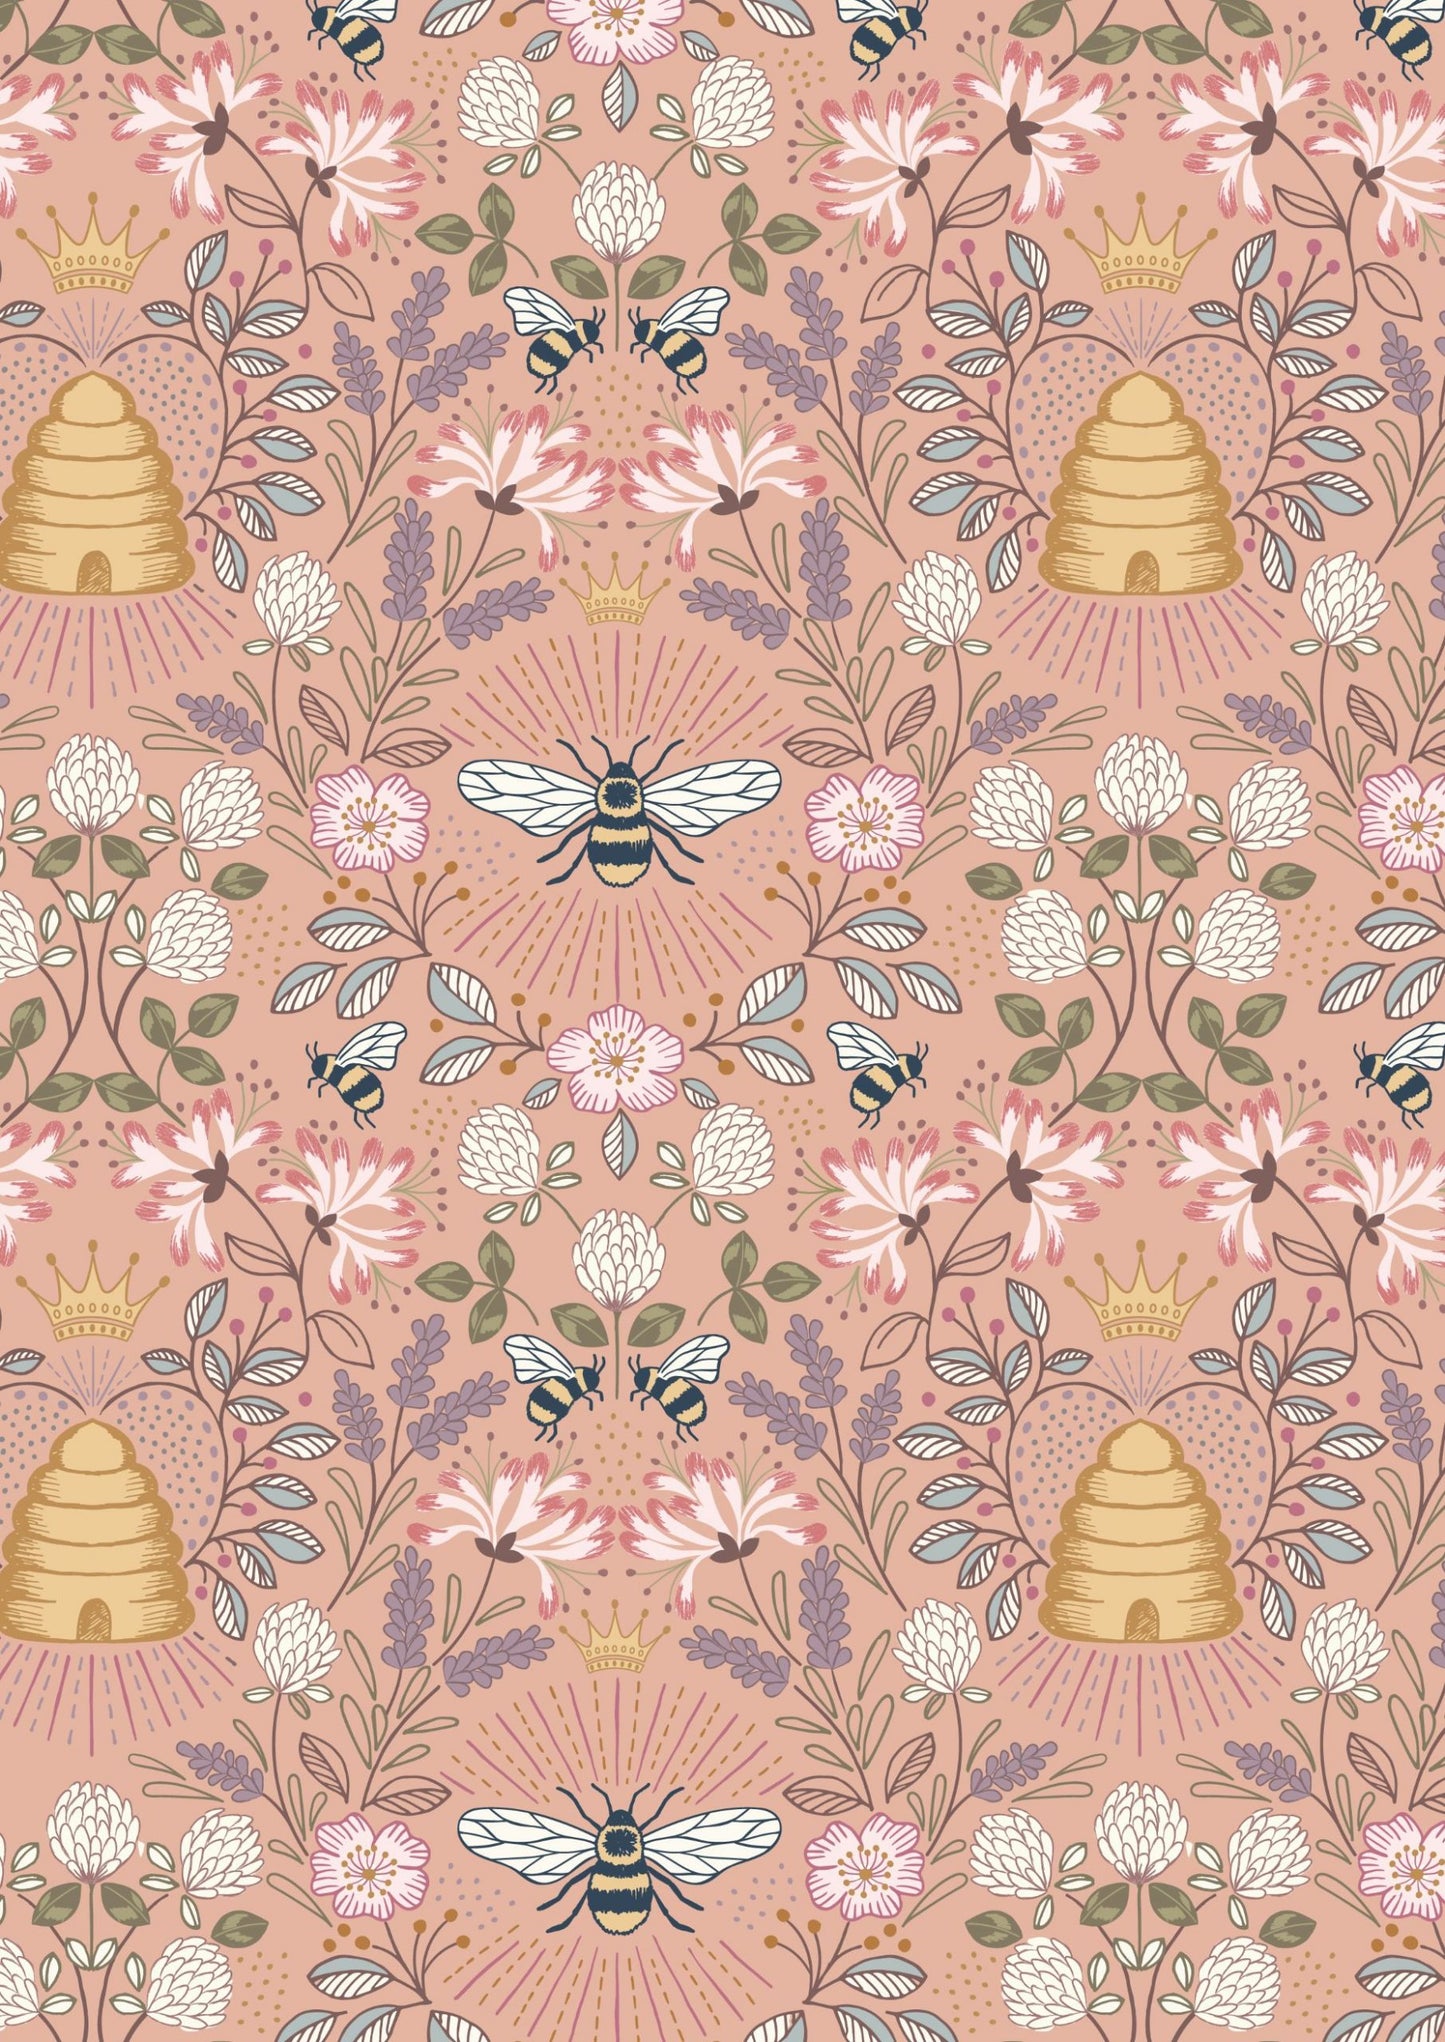 Lewis & Irene - Queen Bee - A500.2 - Bee Hive on Peach Fabric